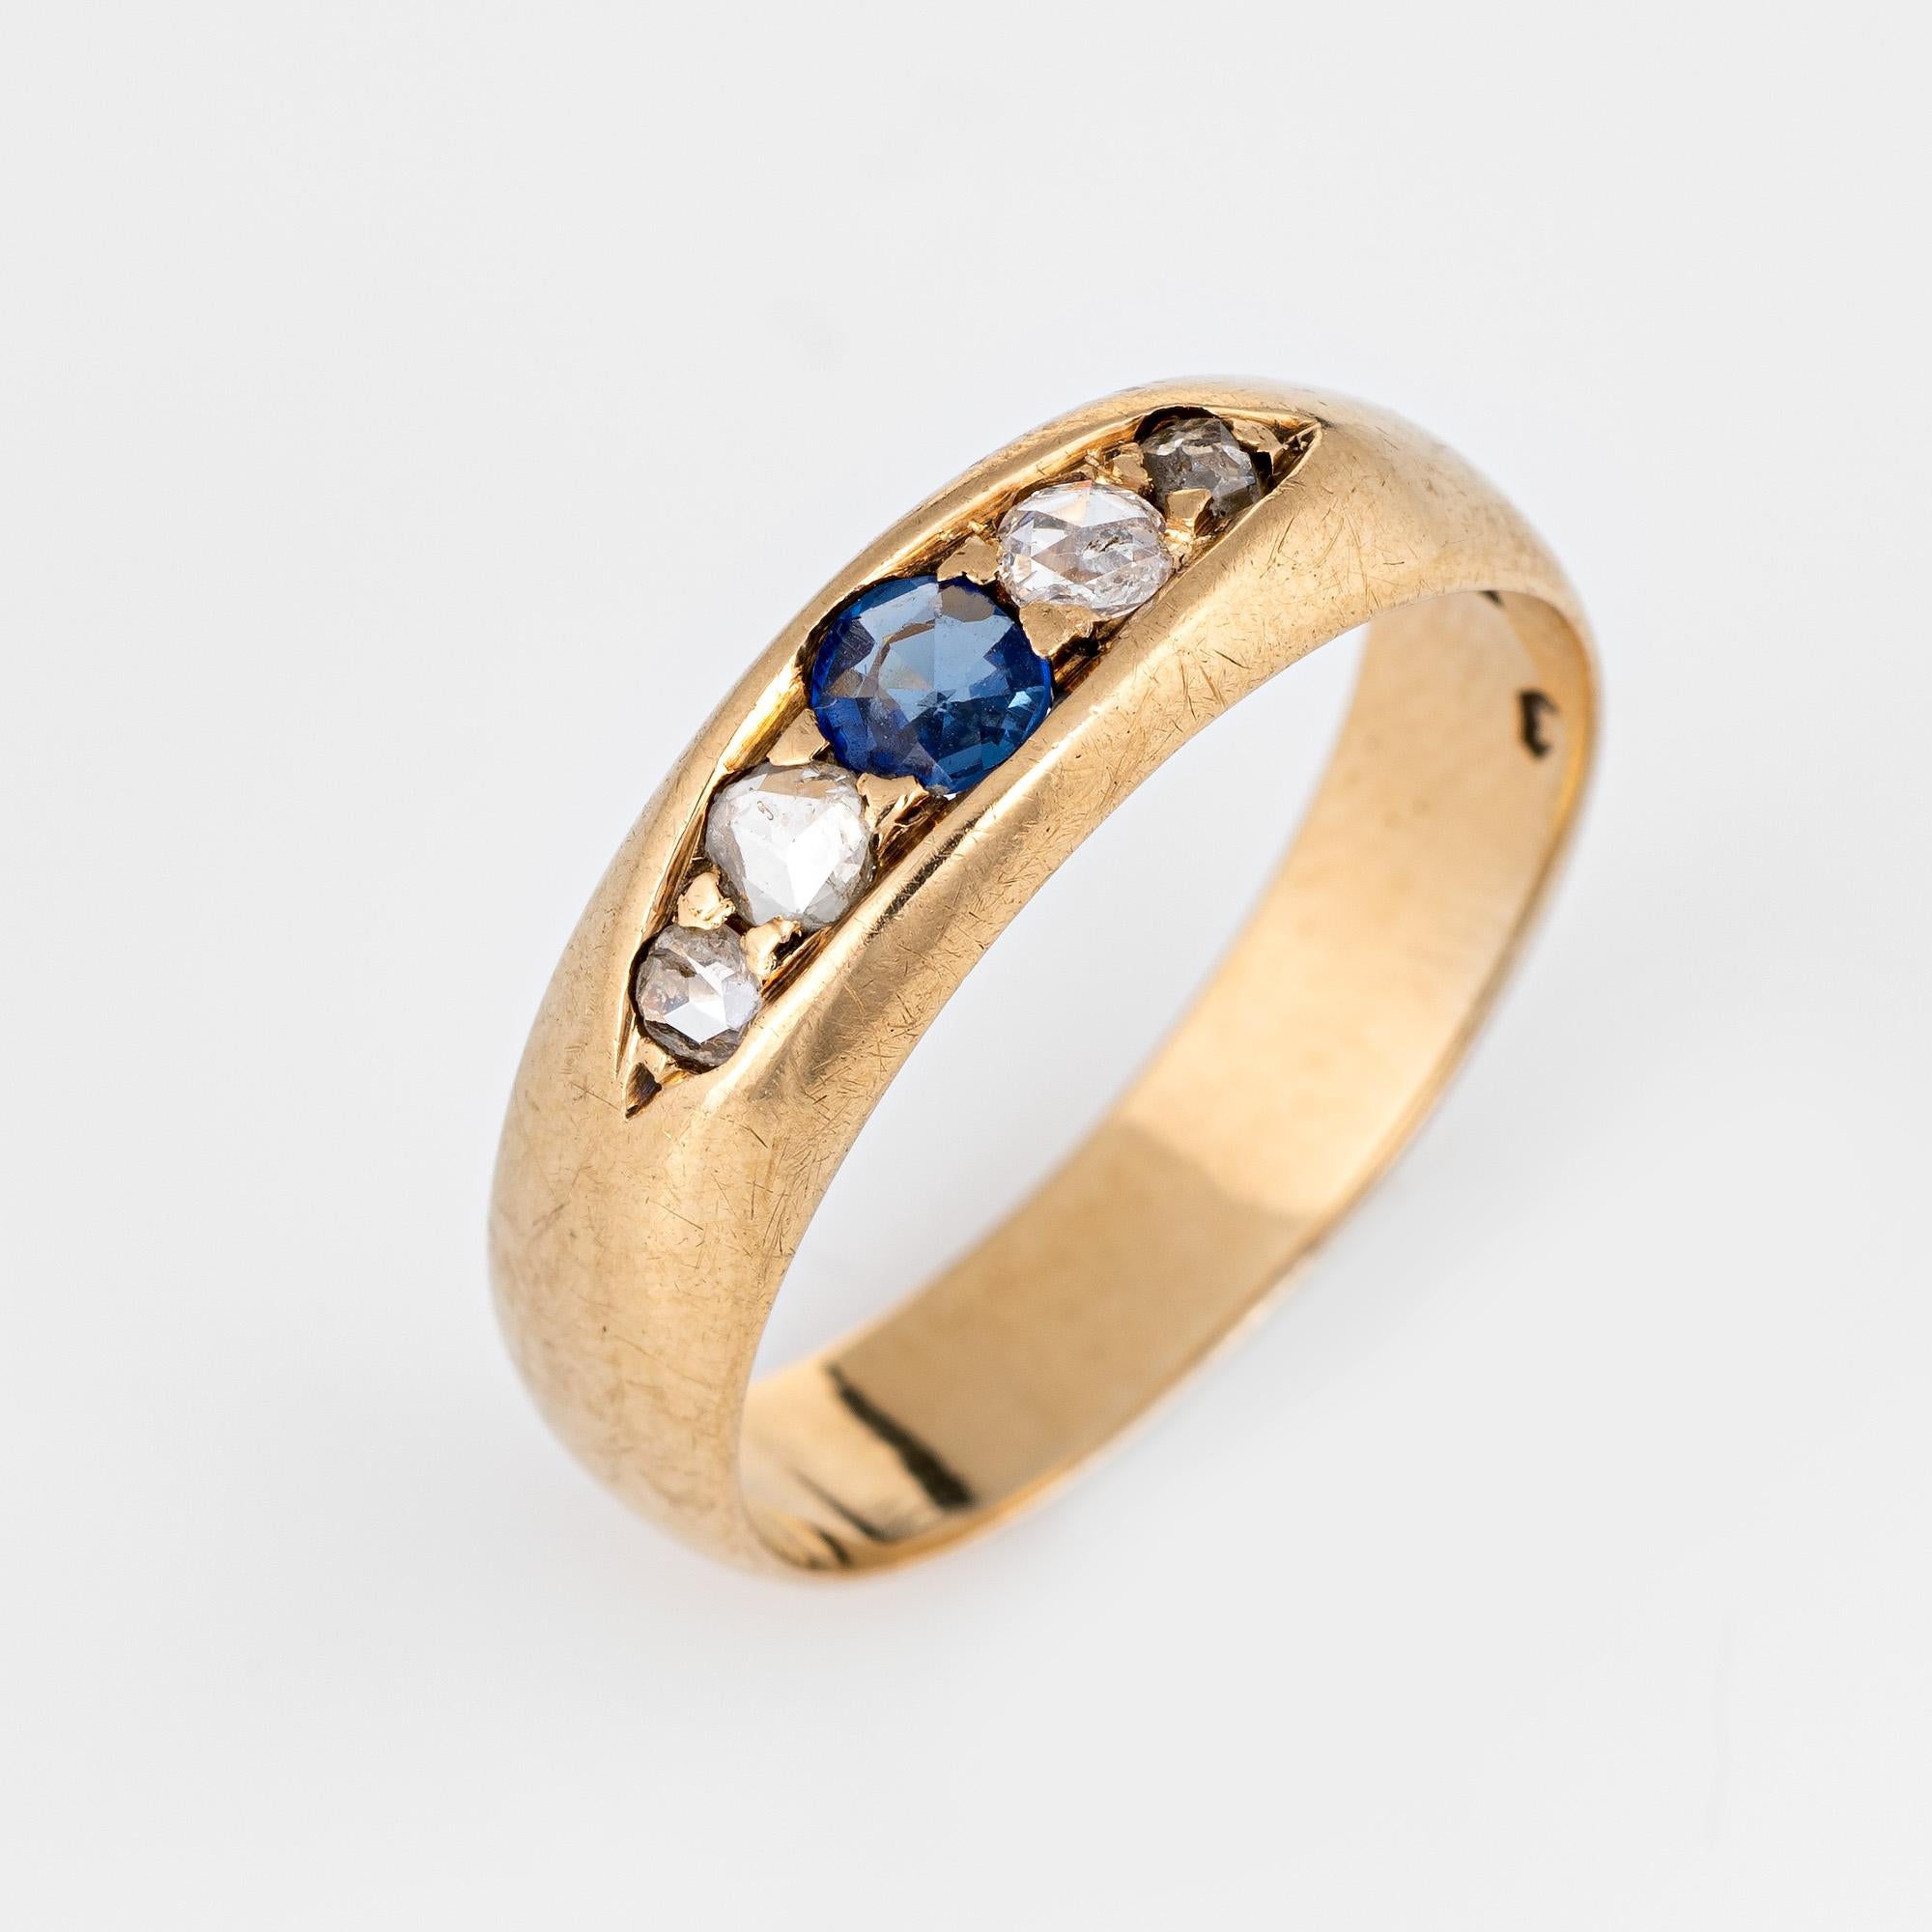 Elegant antique Victorian gypsy band (circa 1880s to 1900s) crafted in 14 karat yellow gold. 

Centrally mounted estimated 0.15 carat blue sapphire is accented with two estimated 0.05 and two estimated 0.03 carat old rose cut diamonds. The total